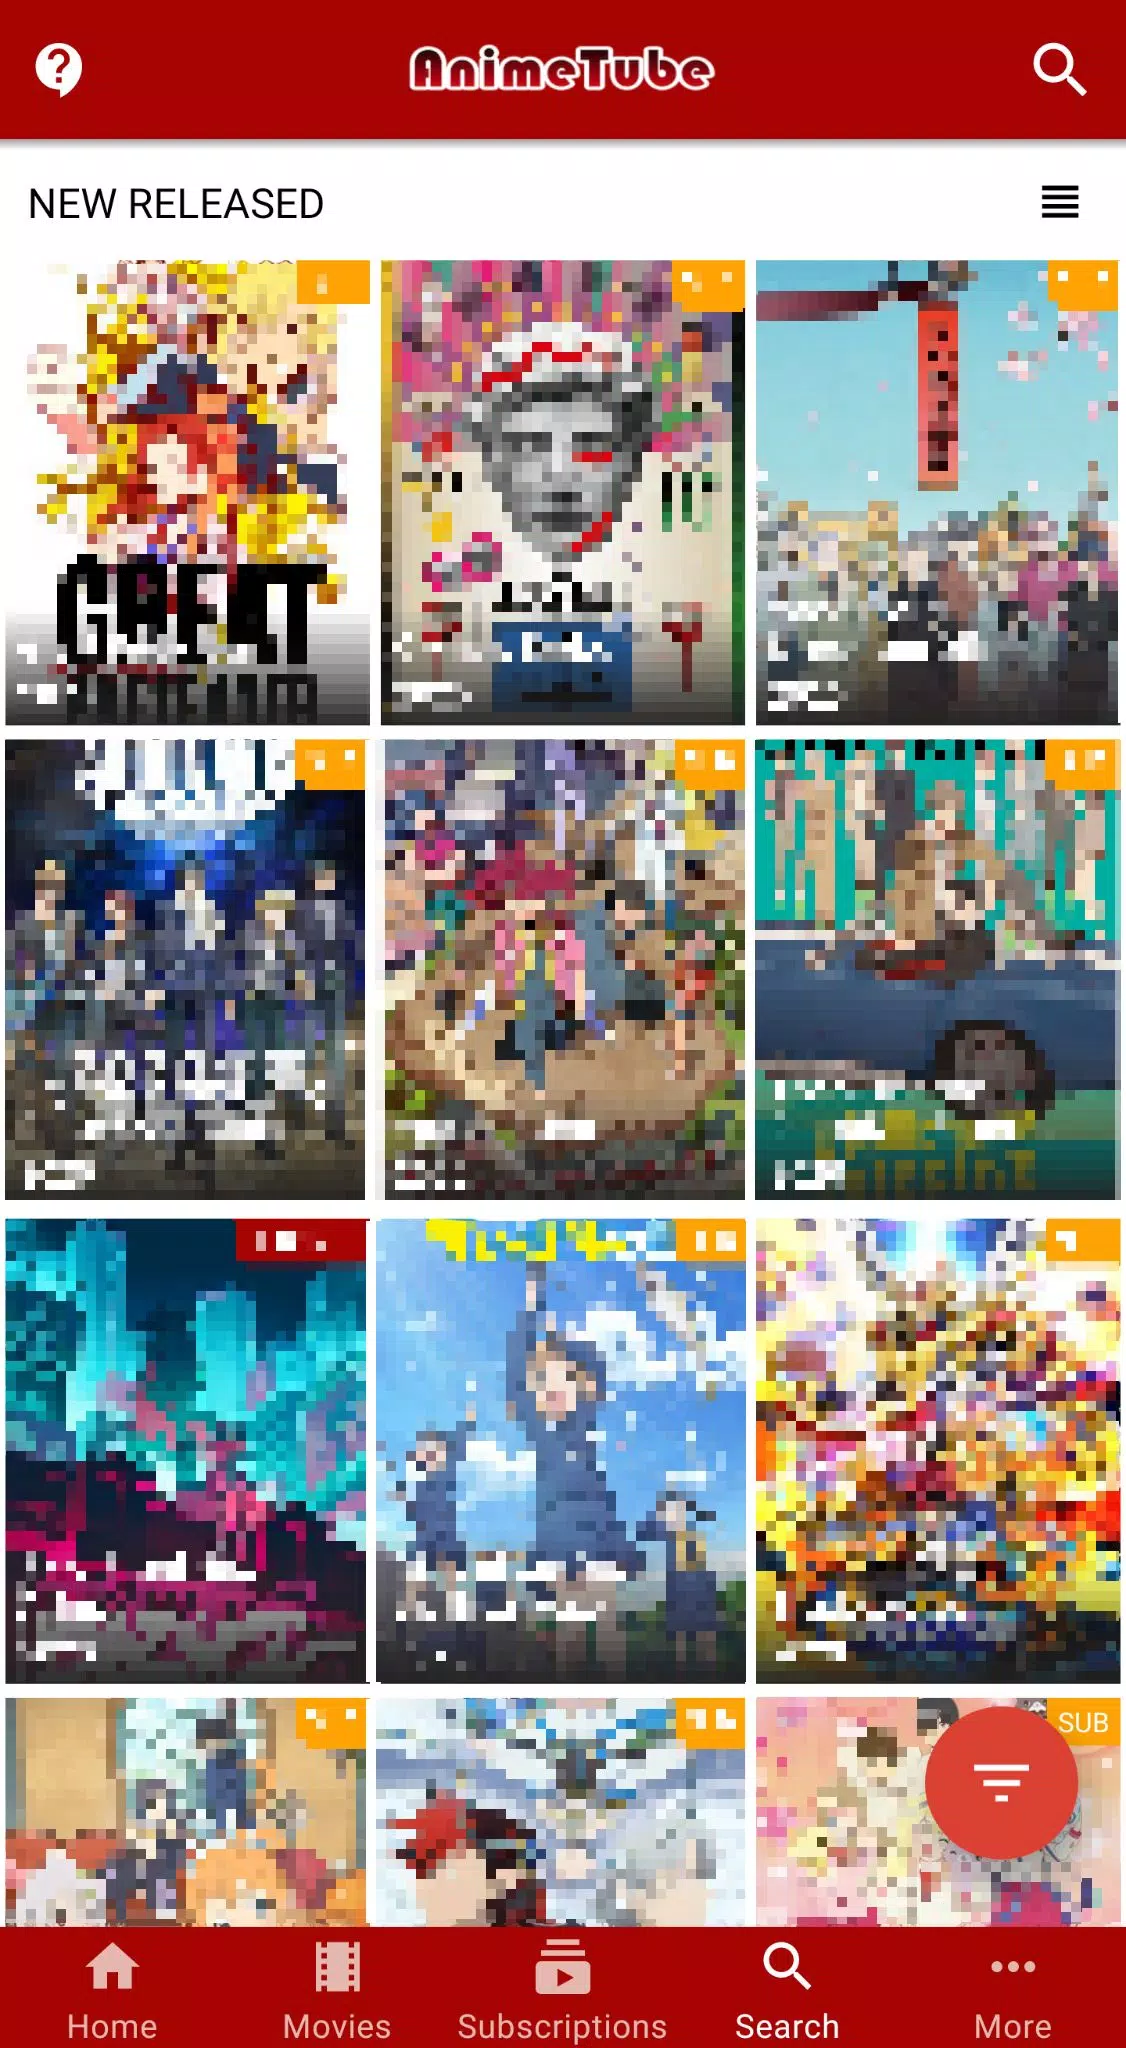 Anime Fanz Tube APK (Android App) - Free Download